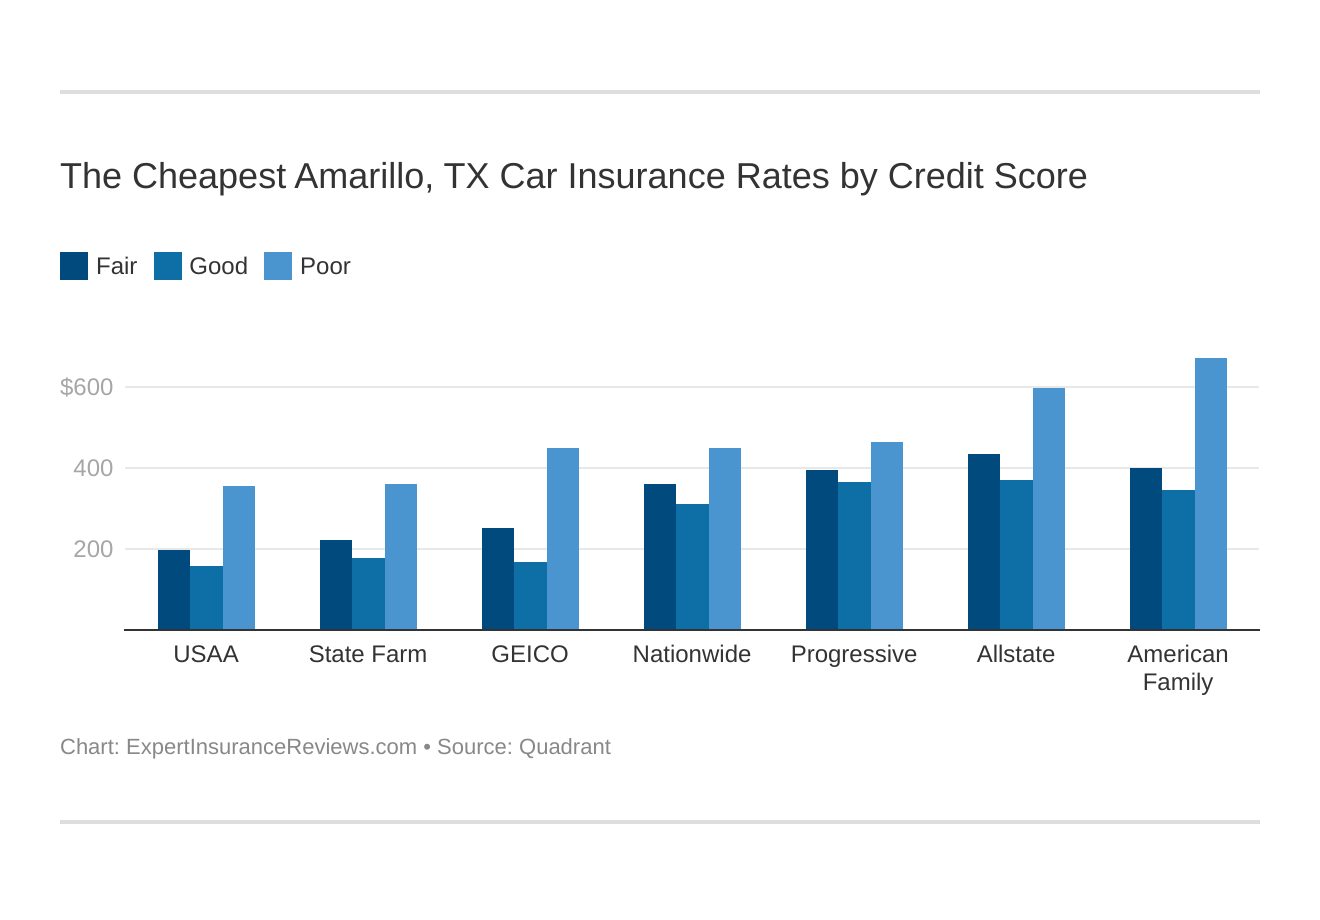 The Cheapest Amarillo, TX Car Insurance Rates by Credit Score